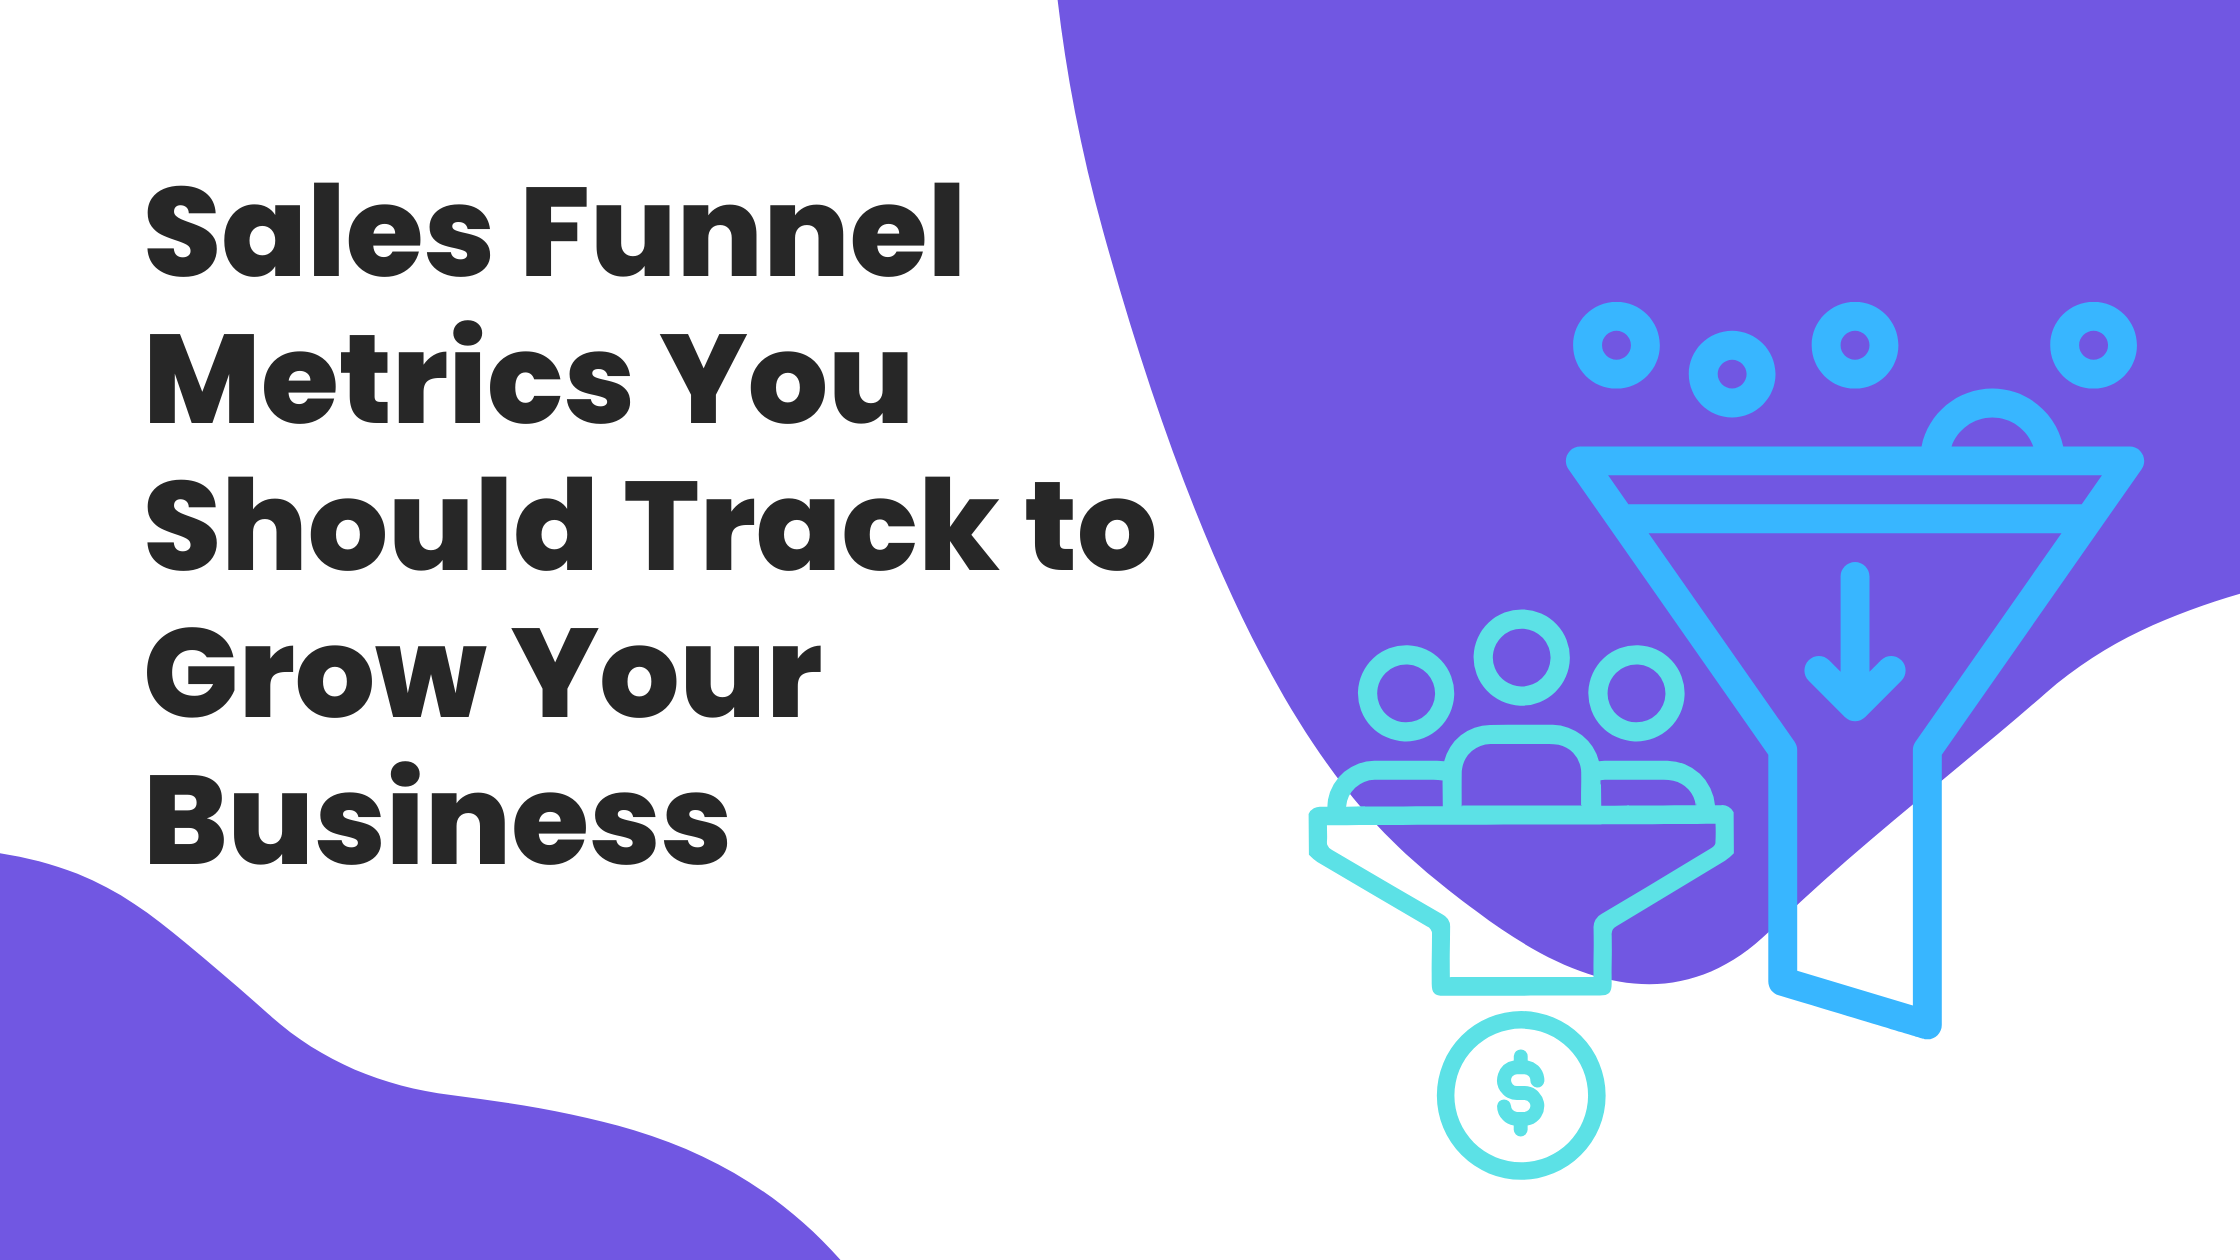 Sales Funnel Metrics You Should Track to Grow Your Business